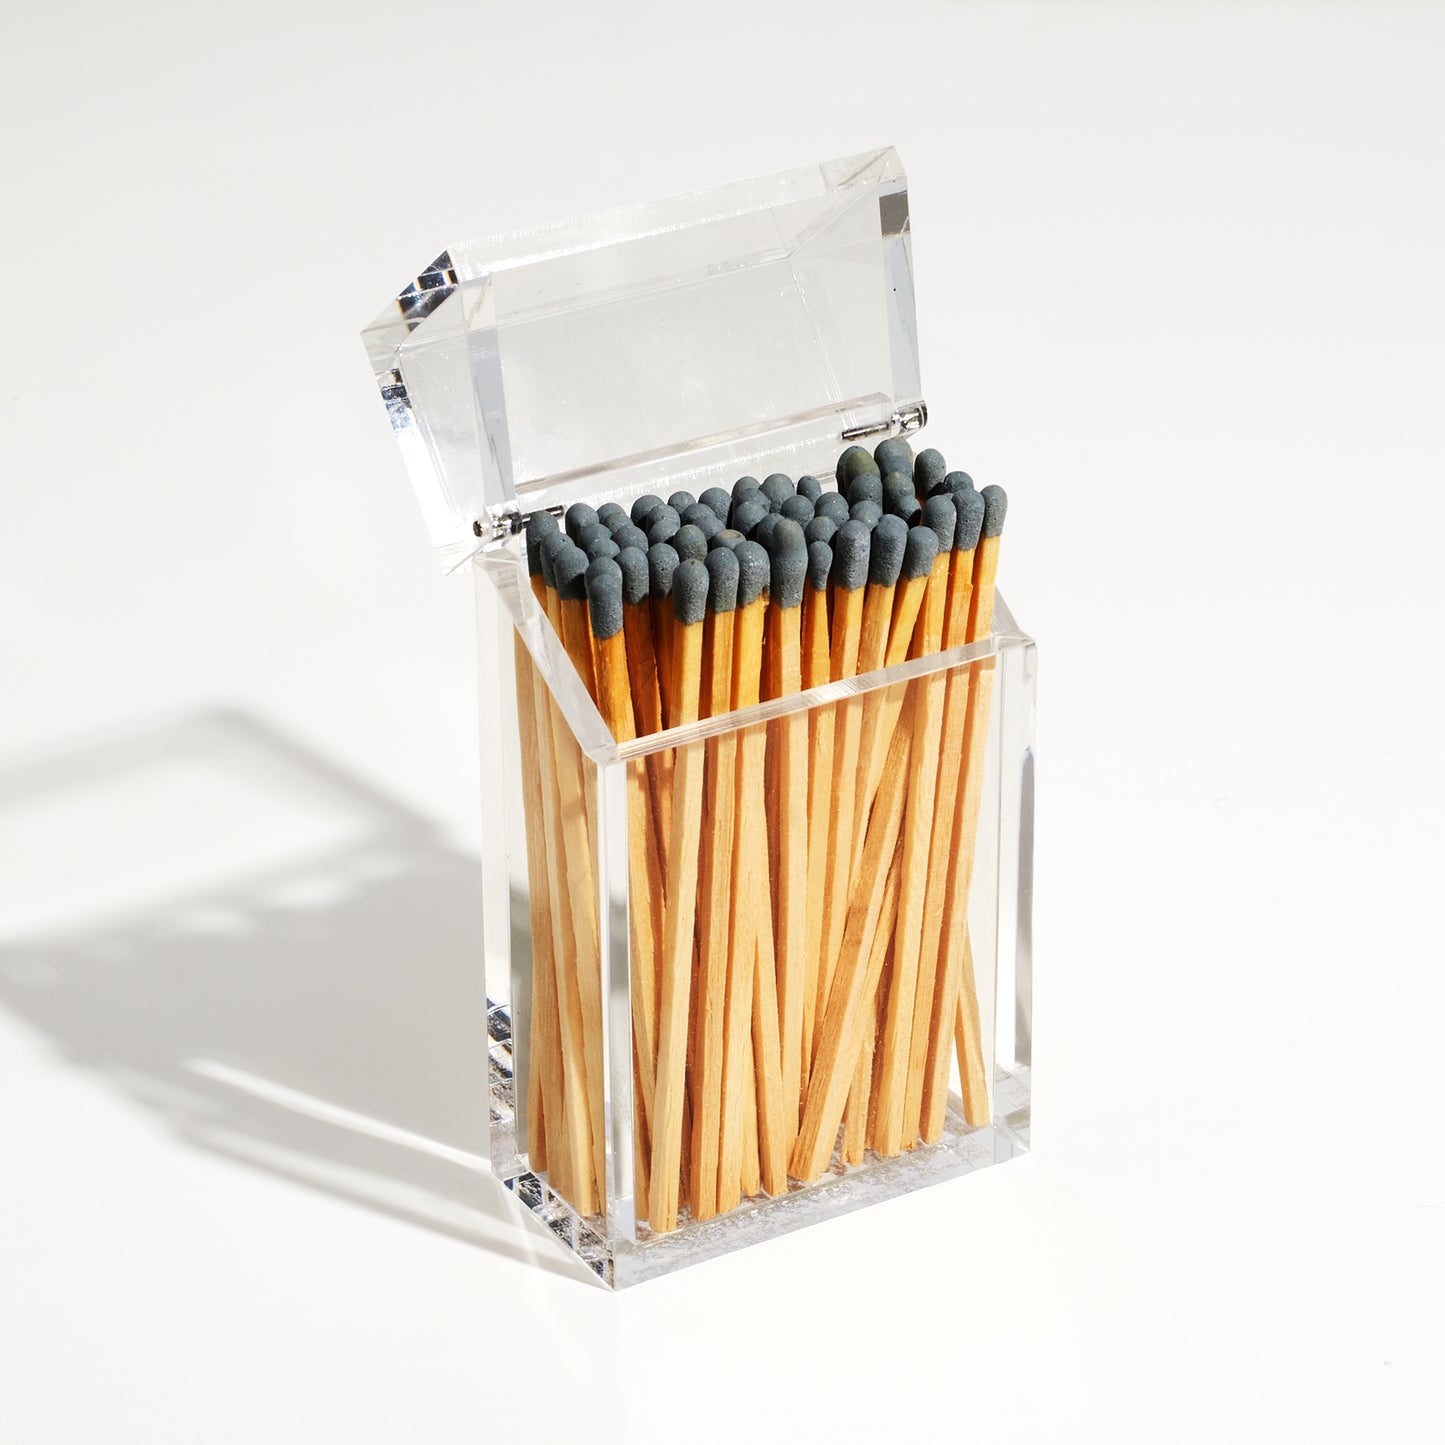 Open Match holder shaped like a Cigarette style acrylic case with gray matches in it.